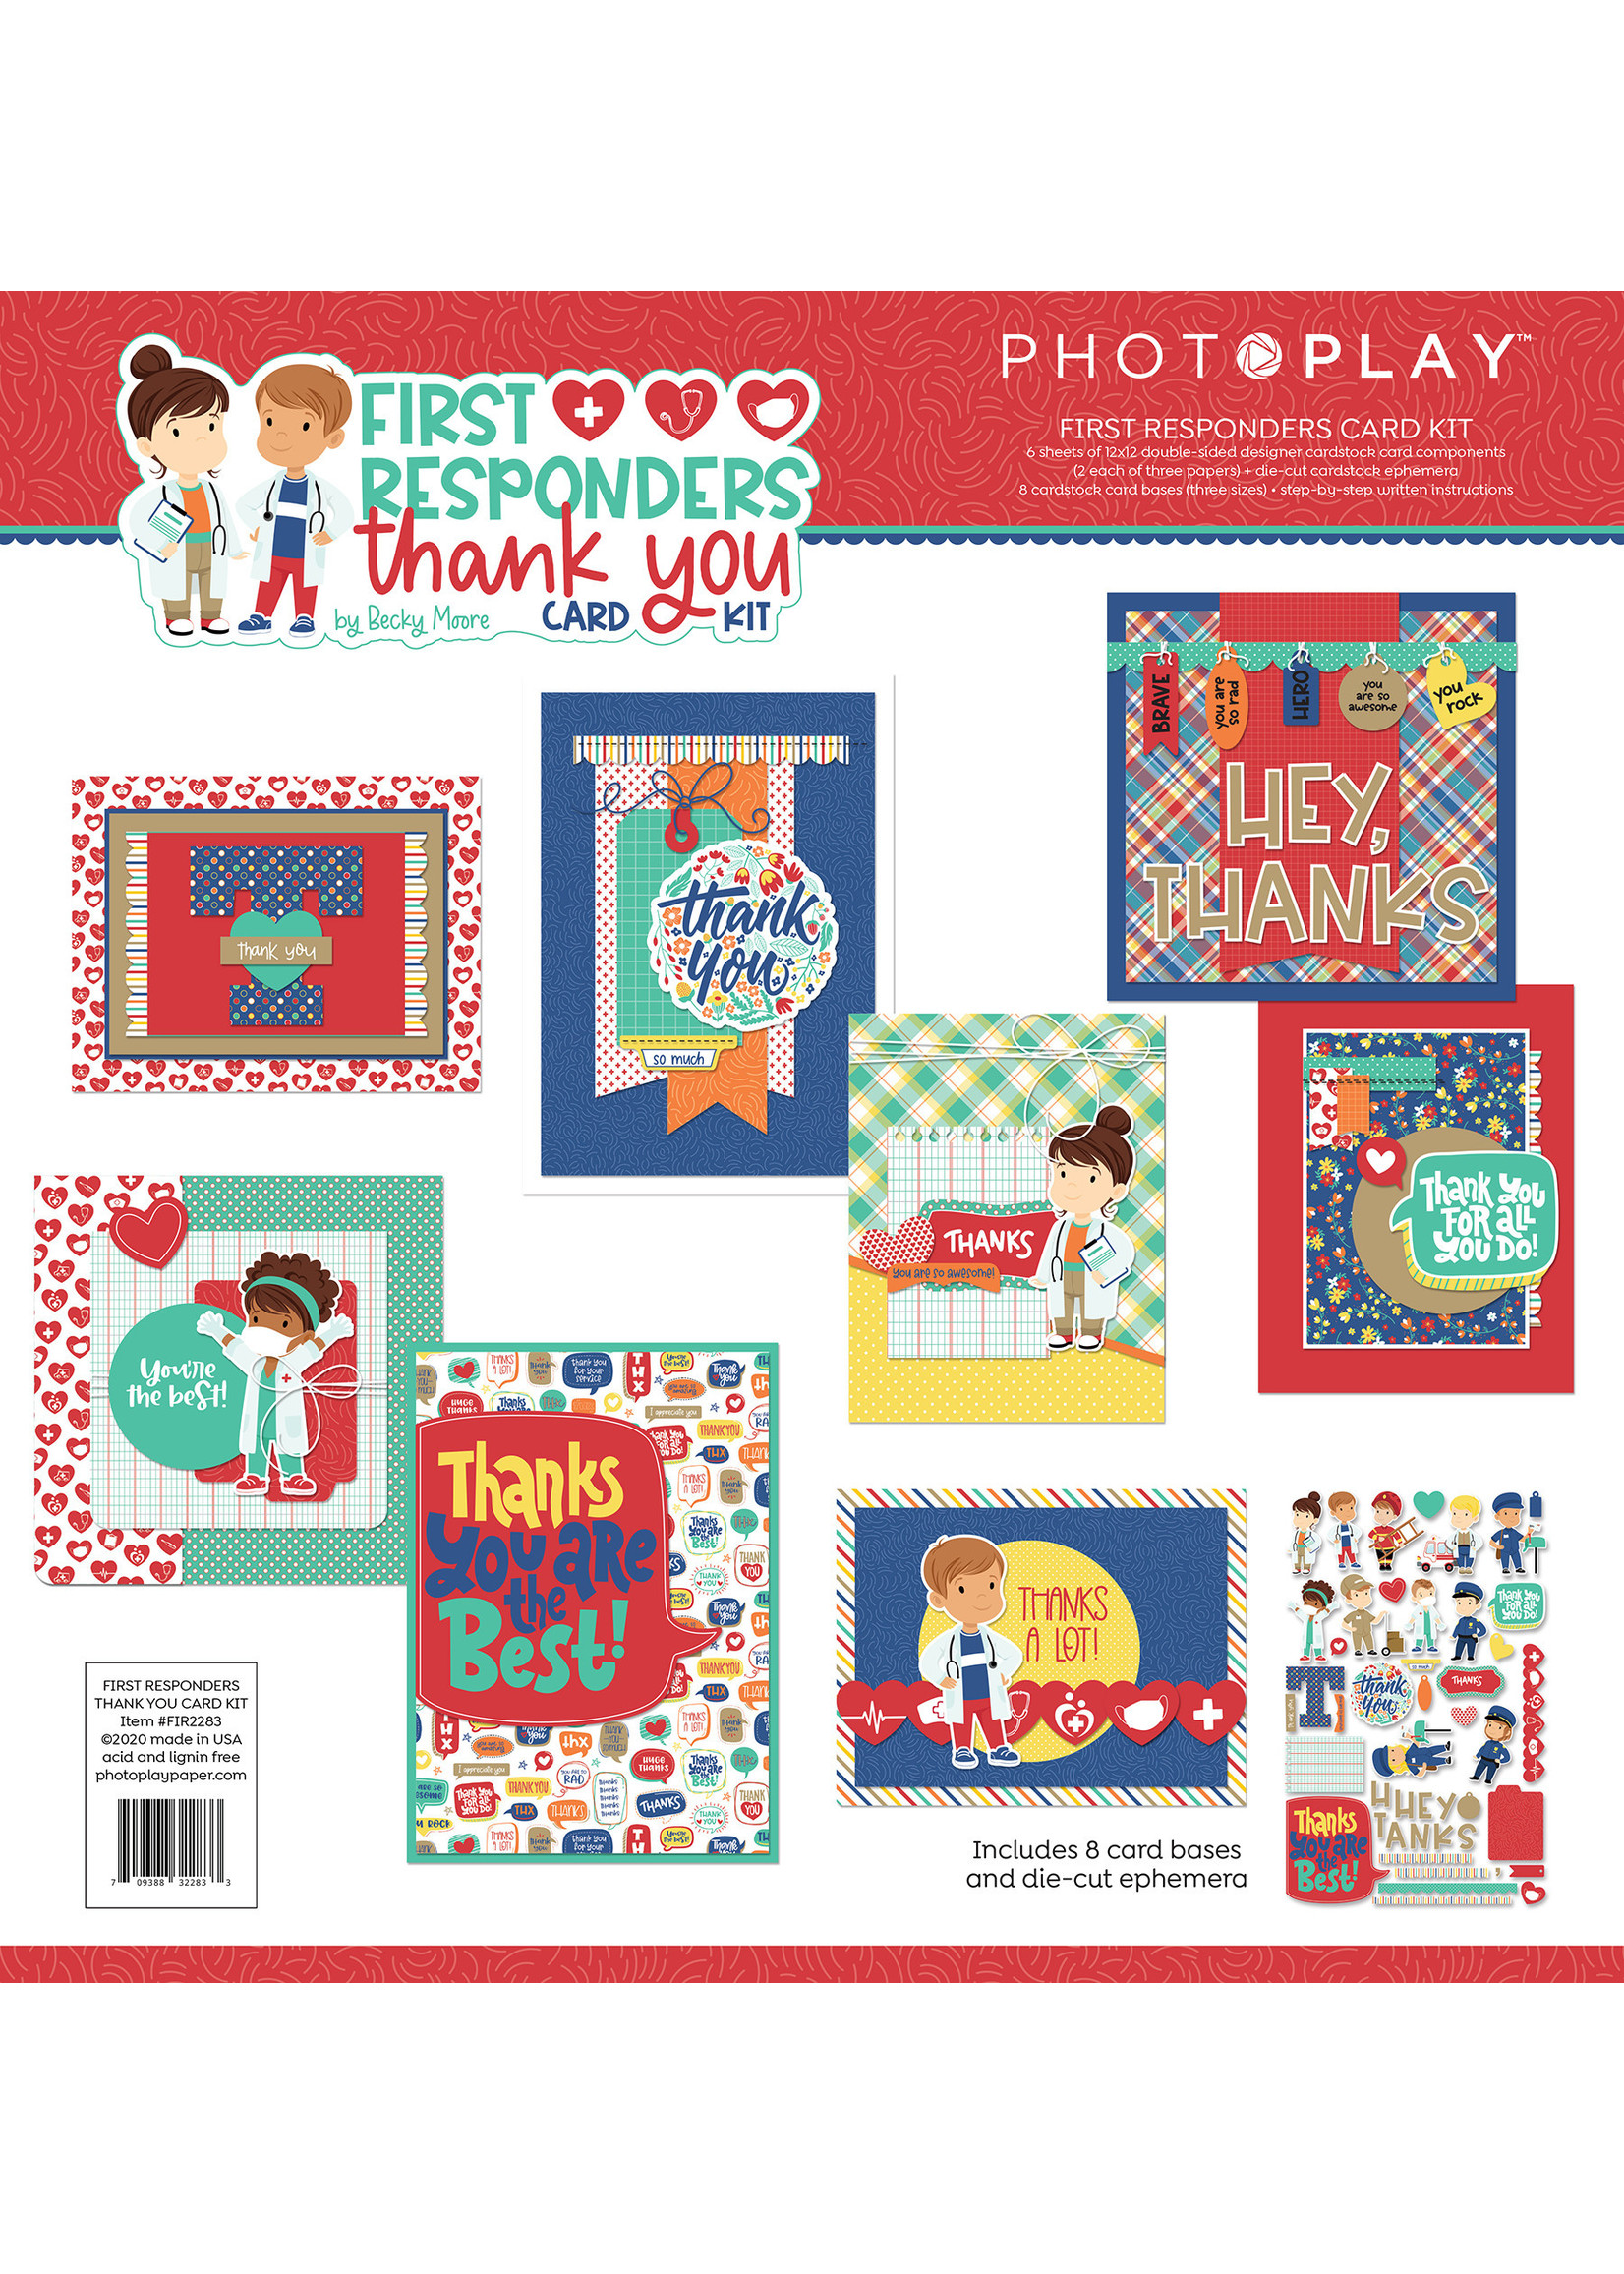 Photoplay Photoplay First Responders Card Kit